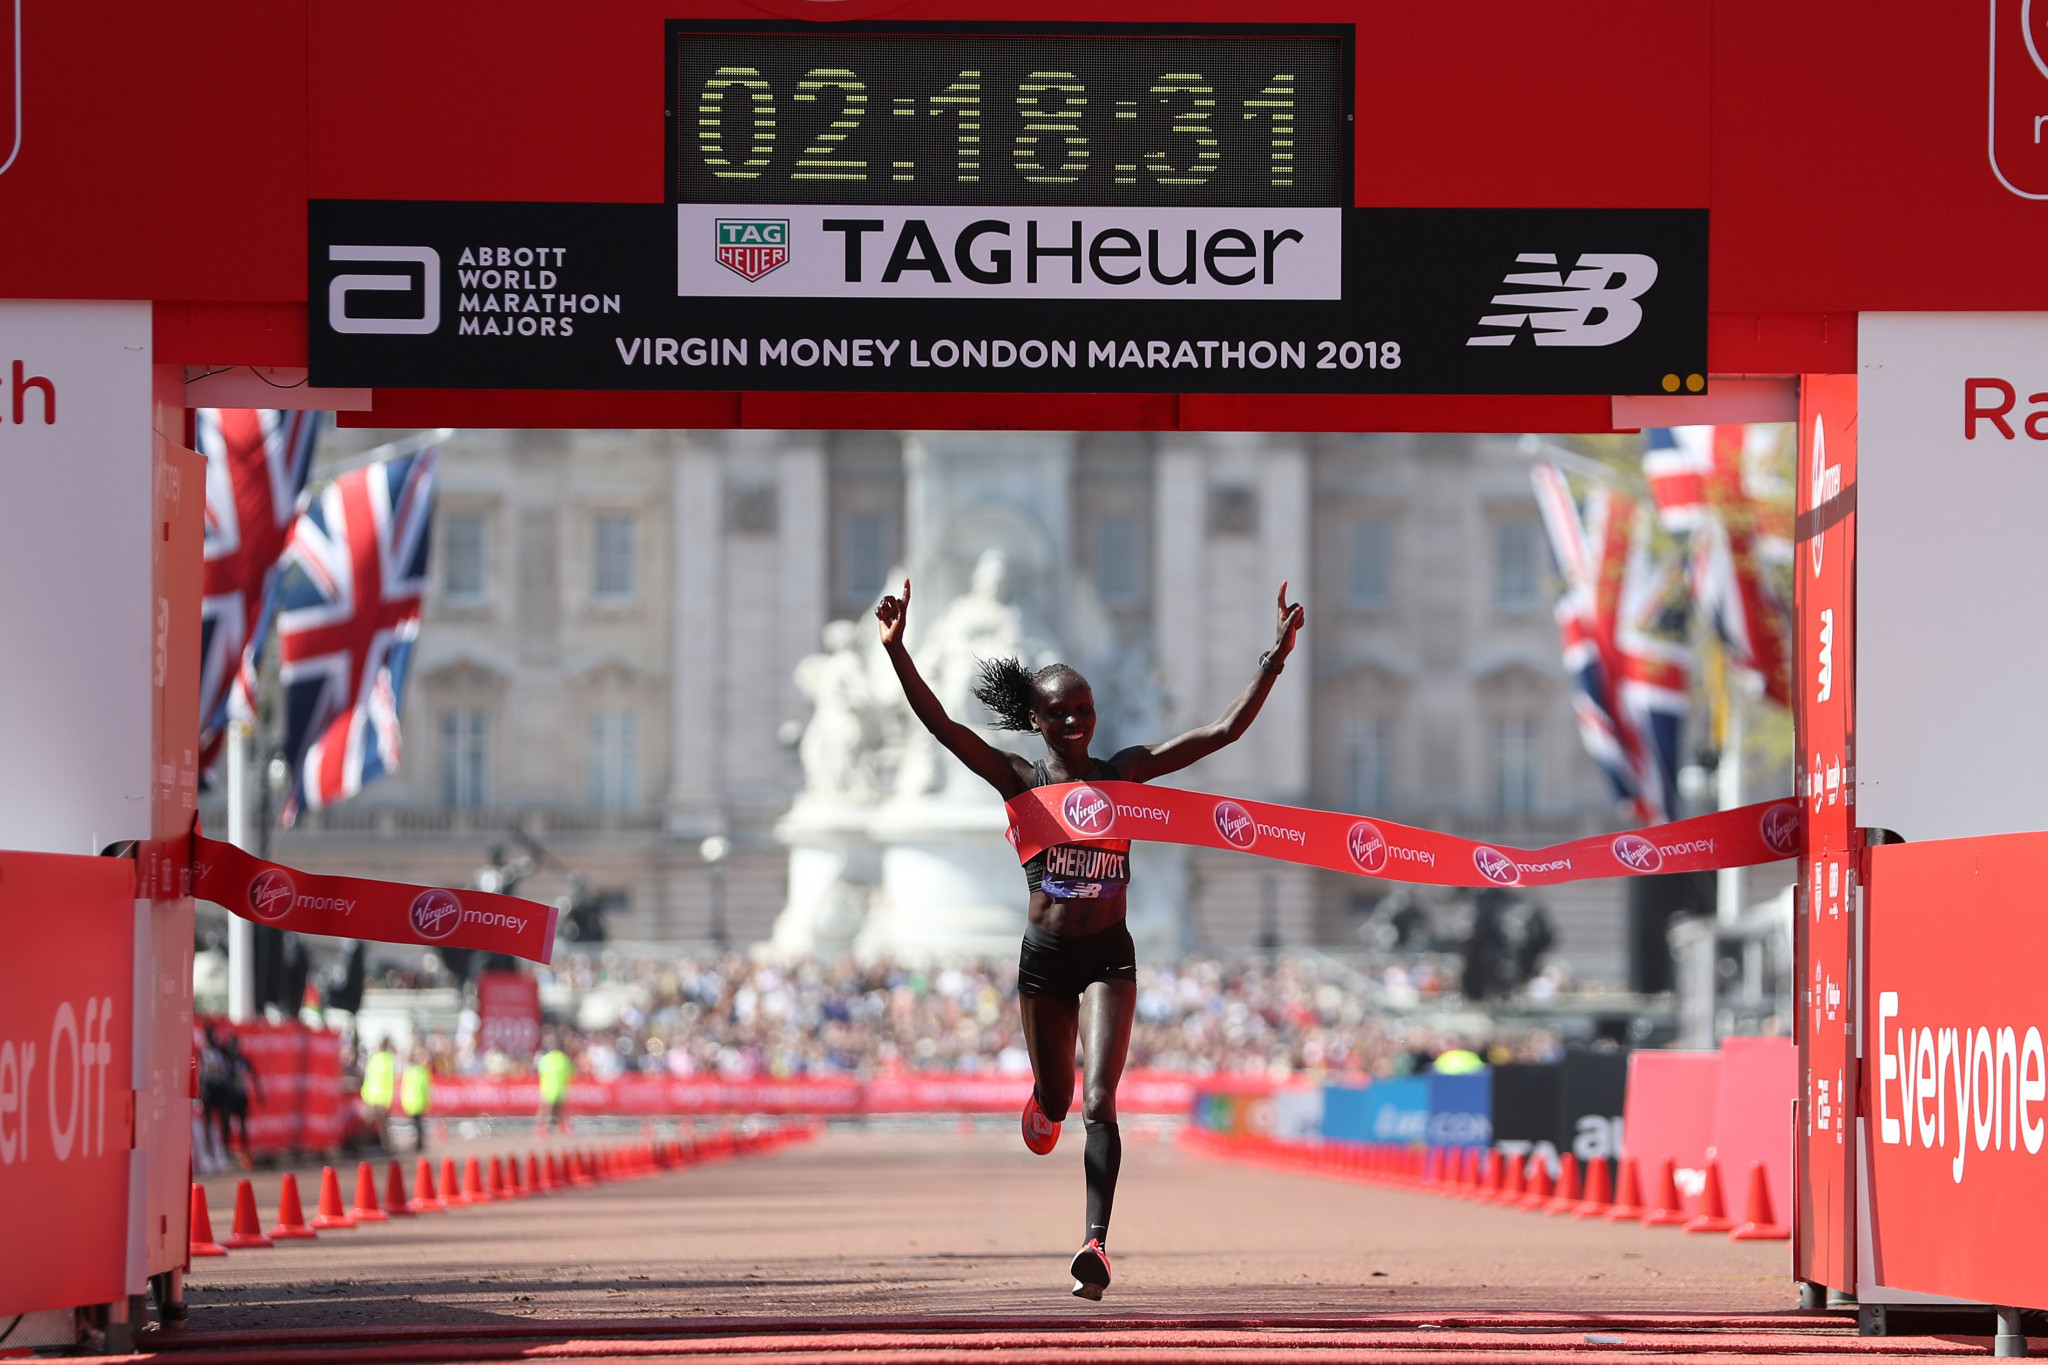 Kipchoge and Cheruiyot seal victories at London Marathon as weather ensures world records remain unchallenged